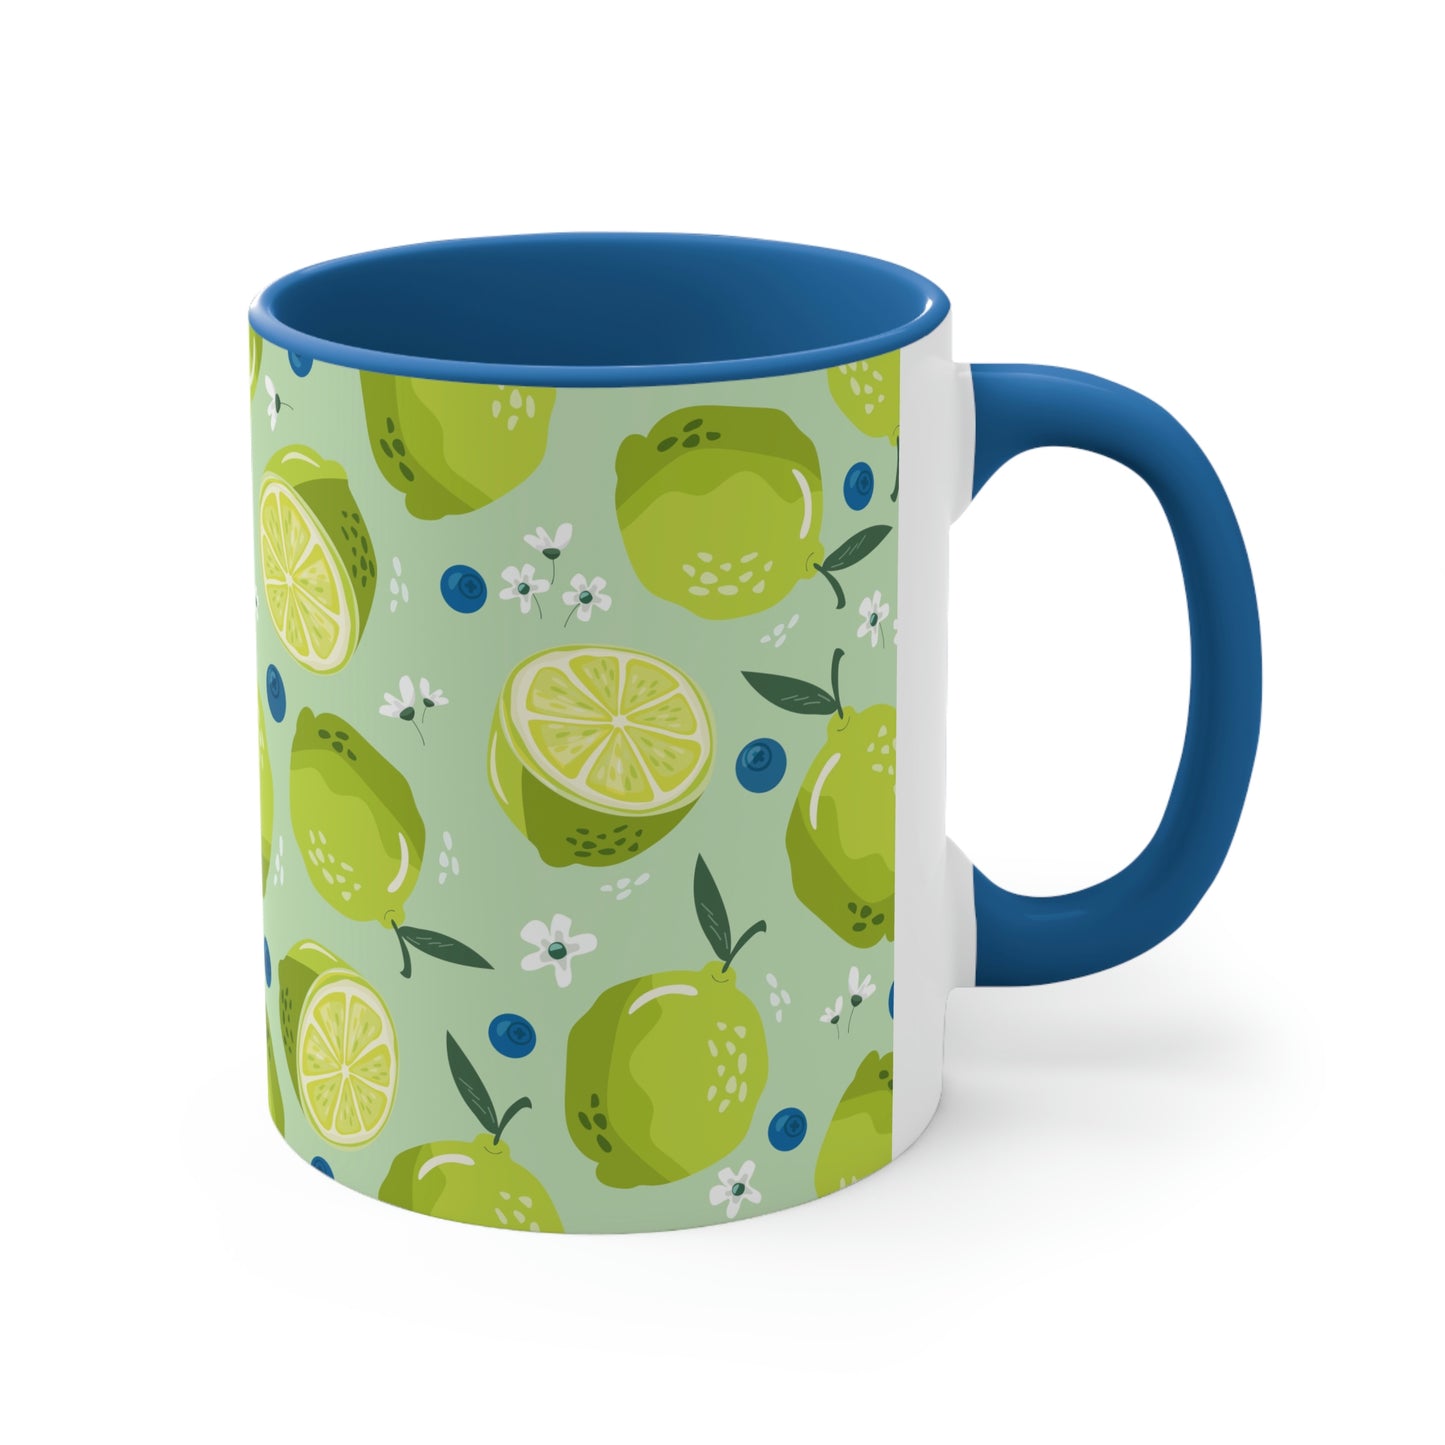 Limes and Blueberries Accent Coffee Mug, 11oz